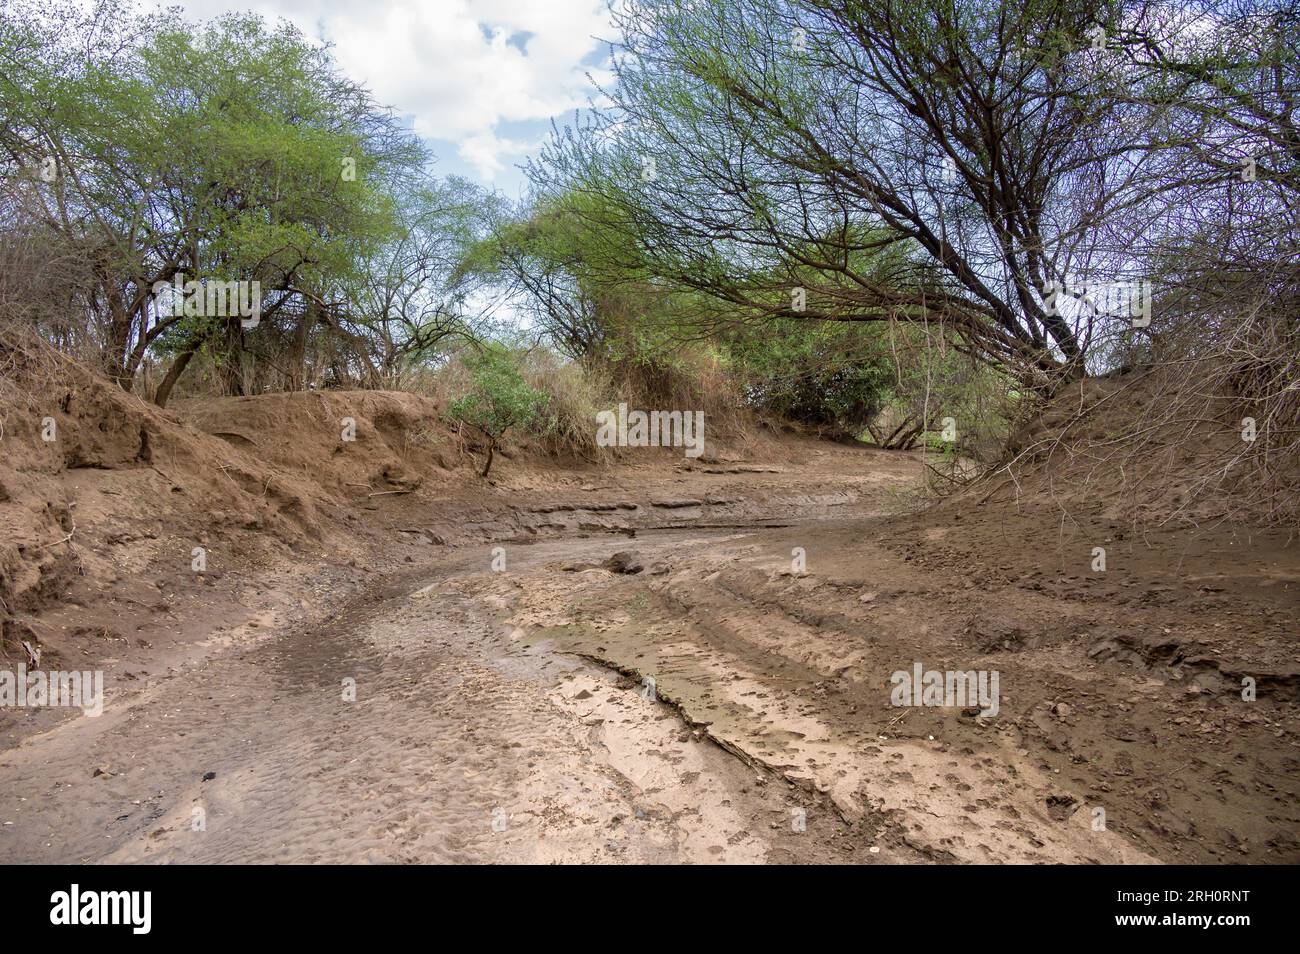 A dried up seasonal river bed lined with trees on the river bank, Pokot, Kenya Stock Photo